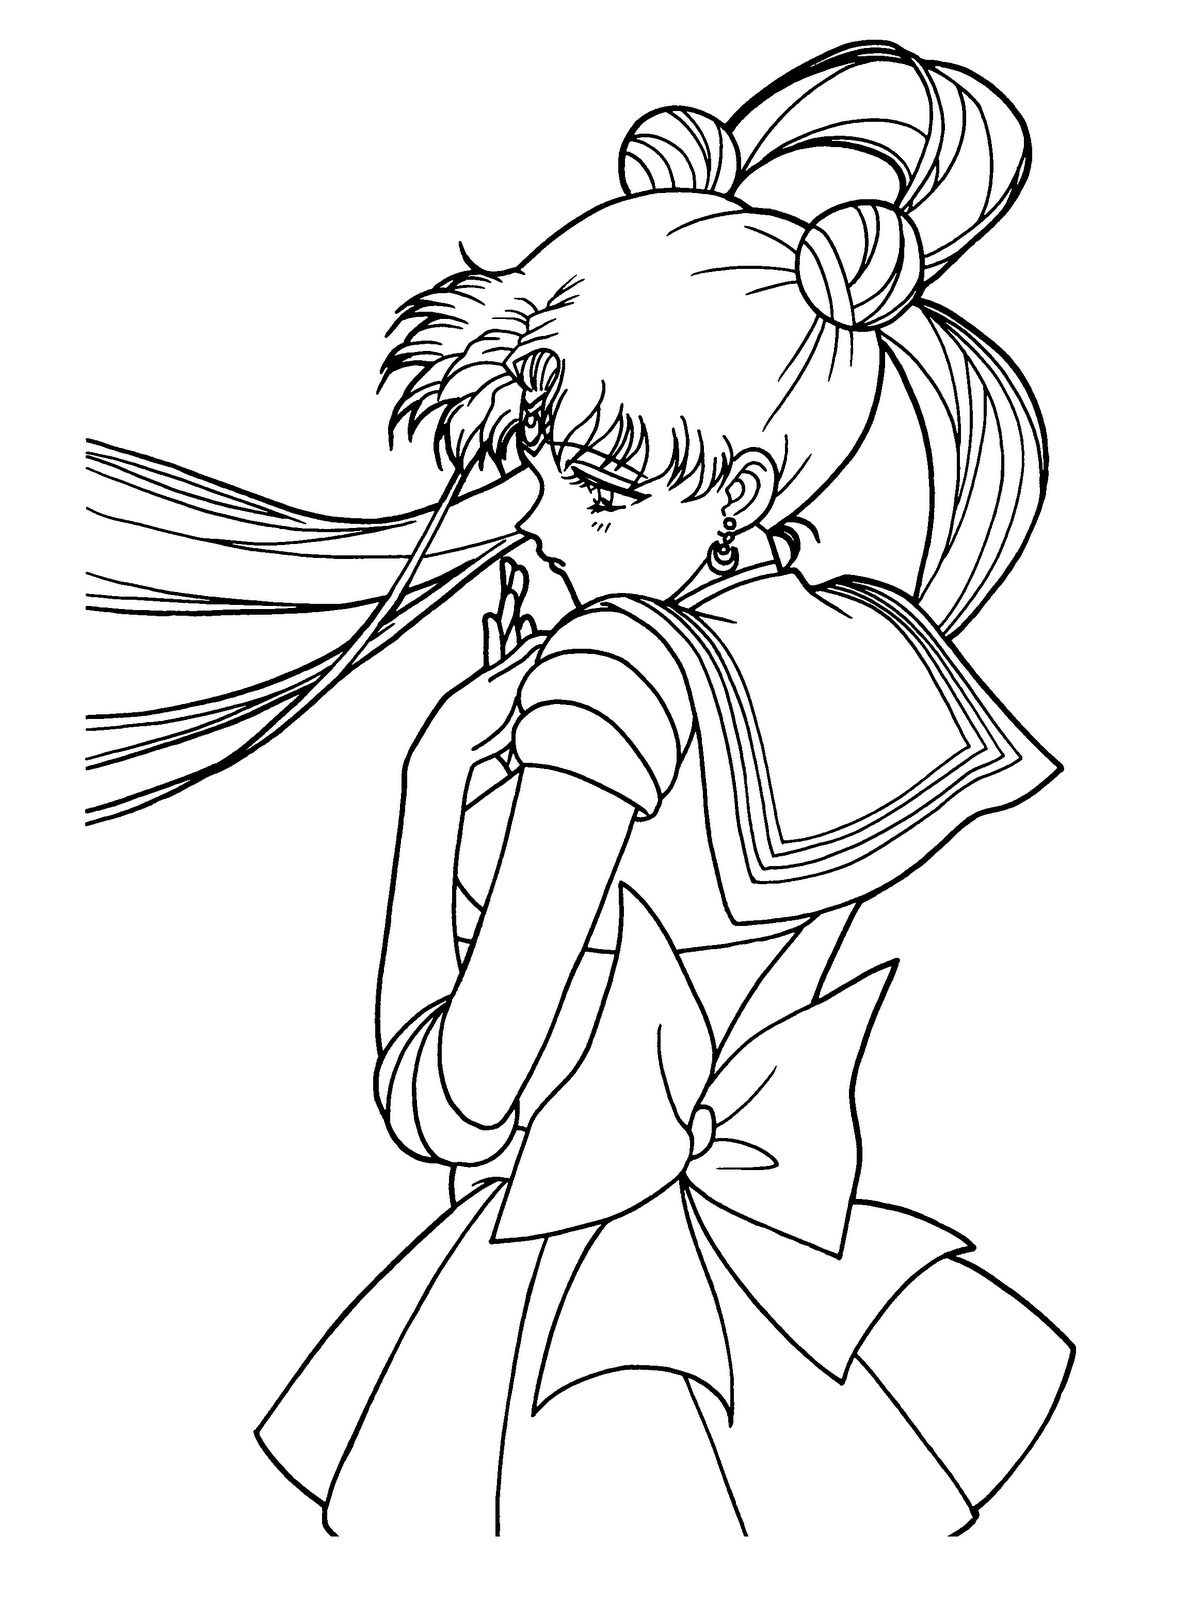 sailor moon coloring pages free - photo #20